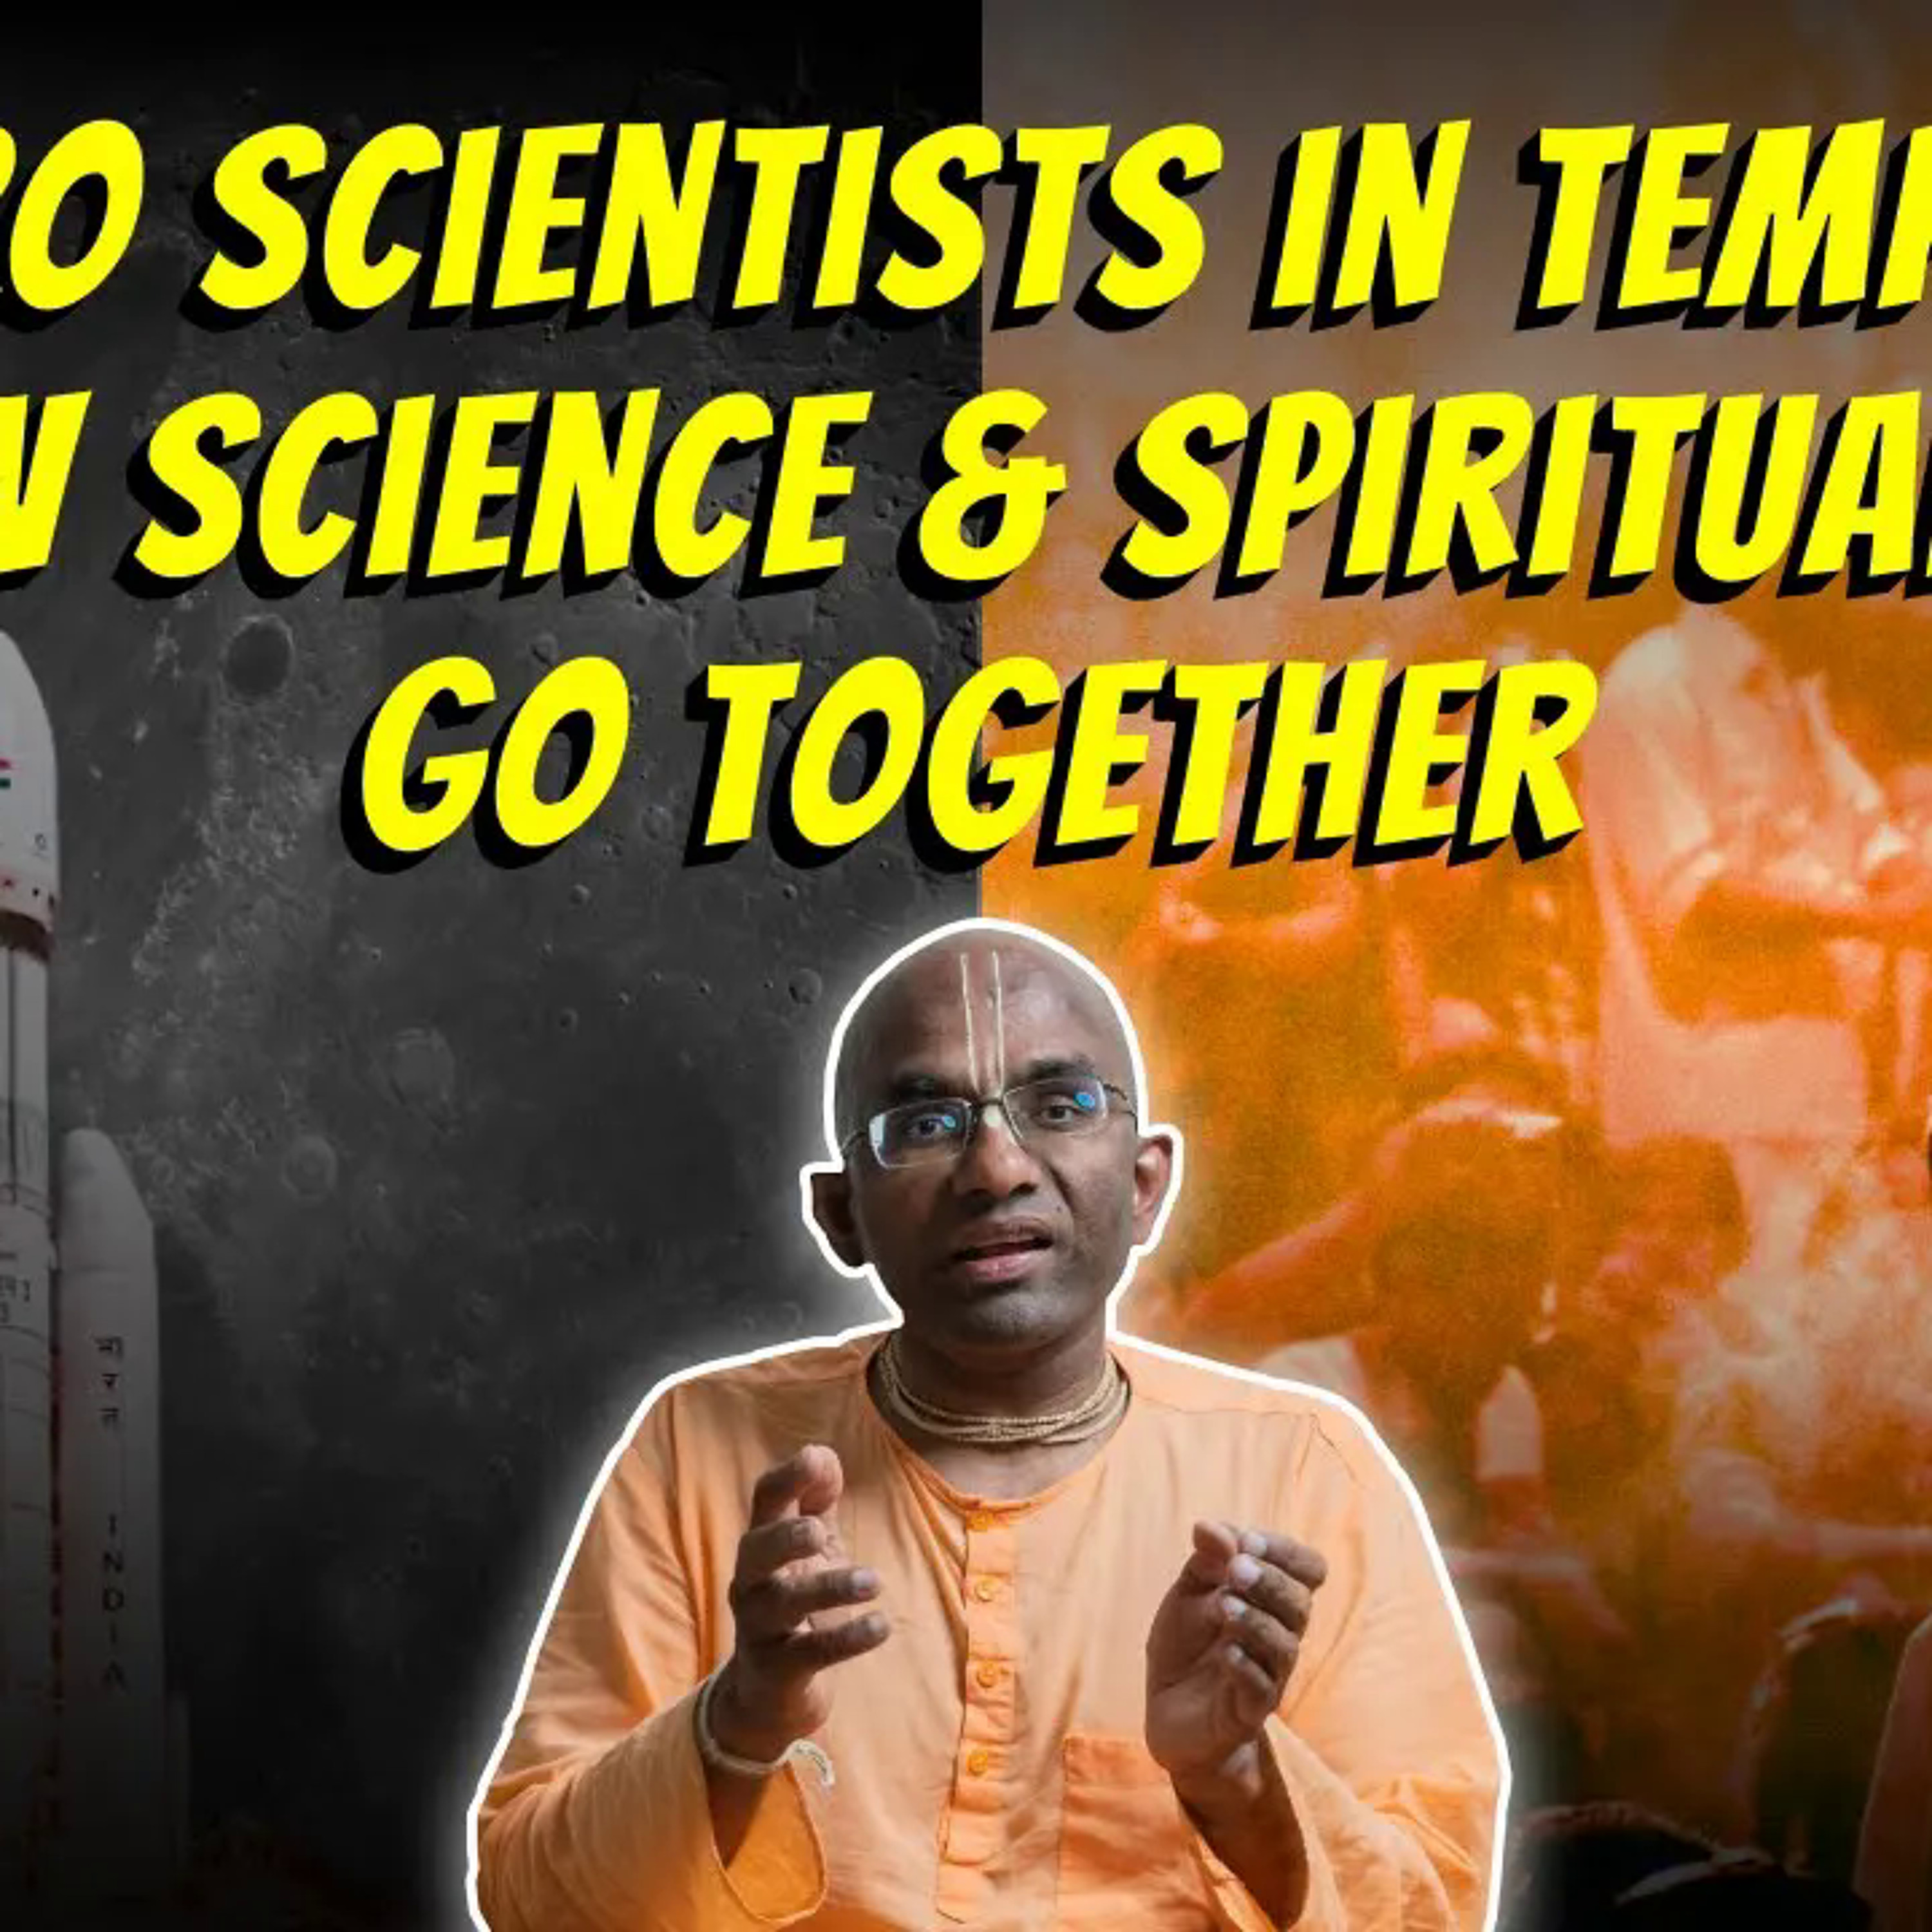 ISRO scientists in temples: How science & spirituality go together